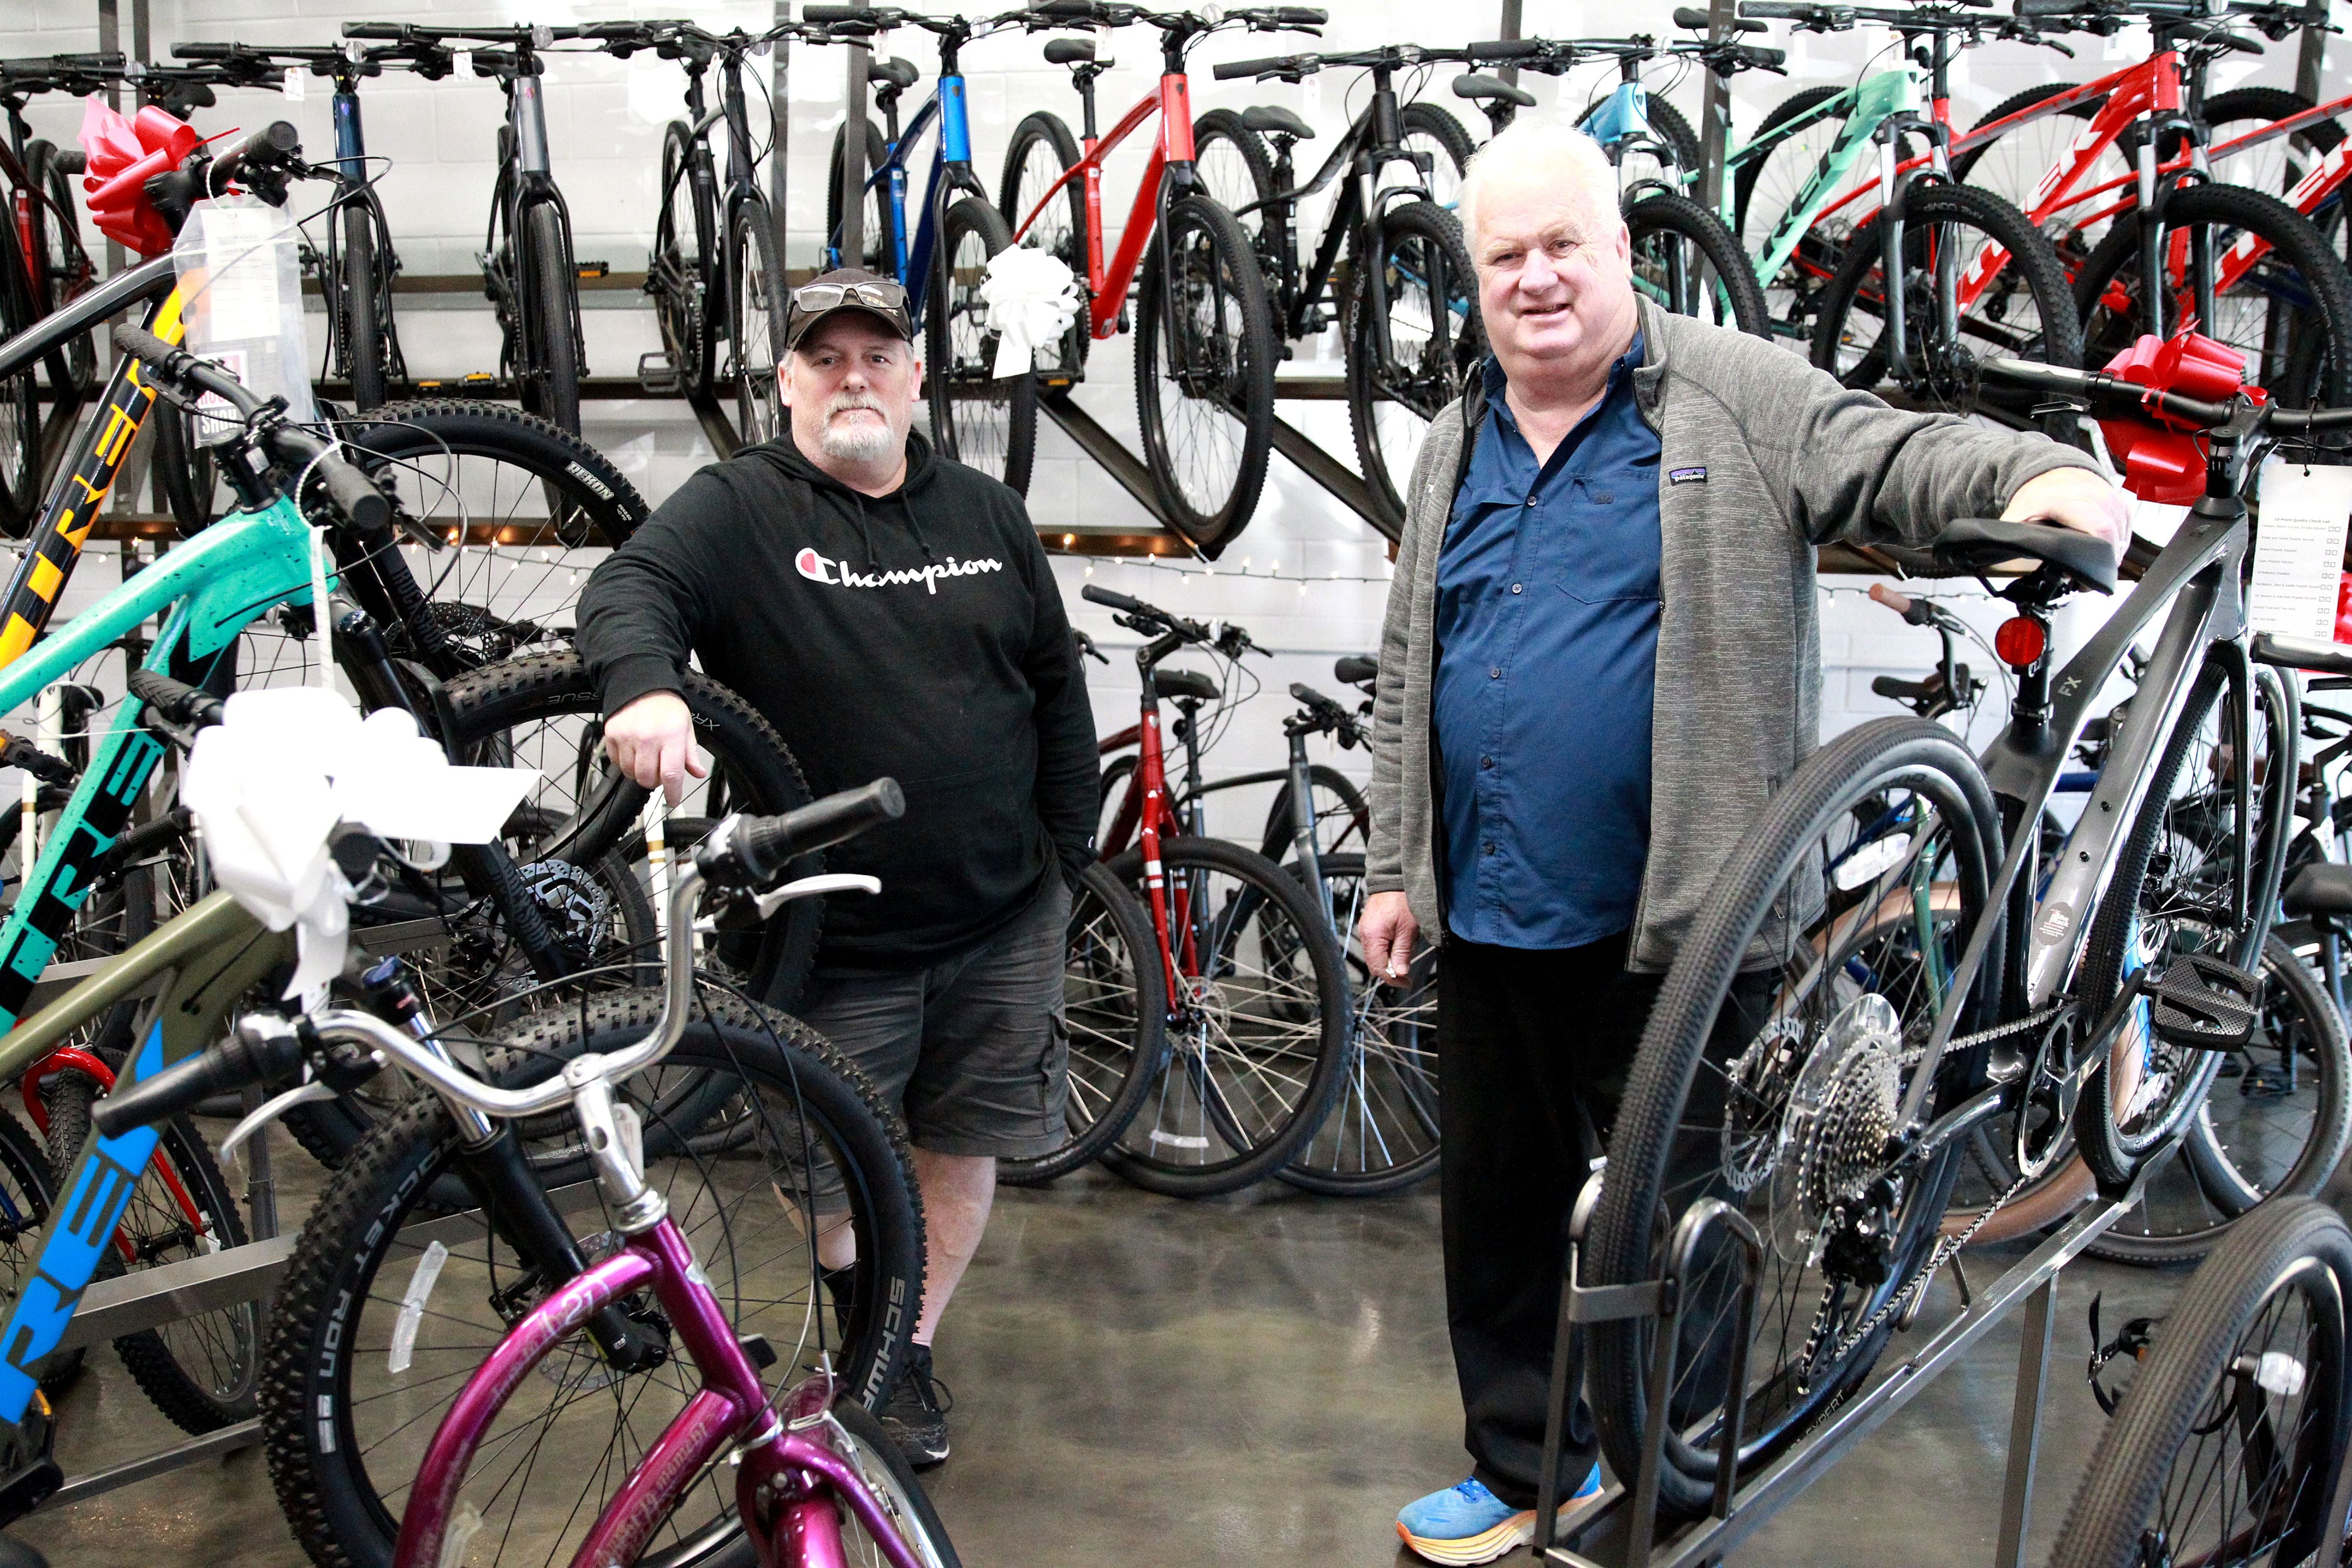 Lance Honeyman (left) and Hal Honeyman and their family’s business, St. Charles-based The Bike Rack, recently acquired Oswego Cyclery, which had been in business since 2004.St. Charles-based The Bike Rack, owned by the Honeyman family, recently acquired Oswego Cyclery, which had been in business since 2004.